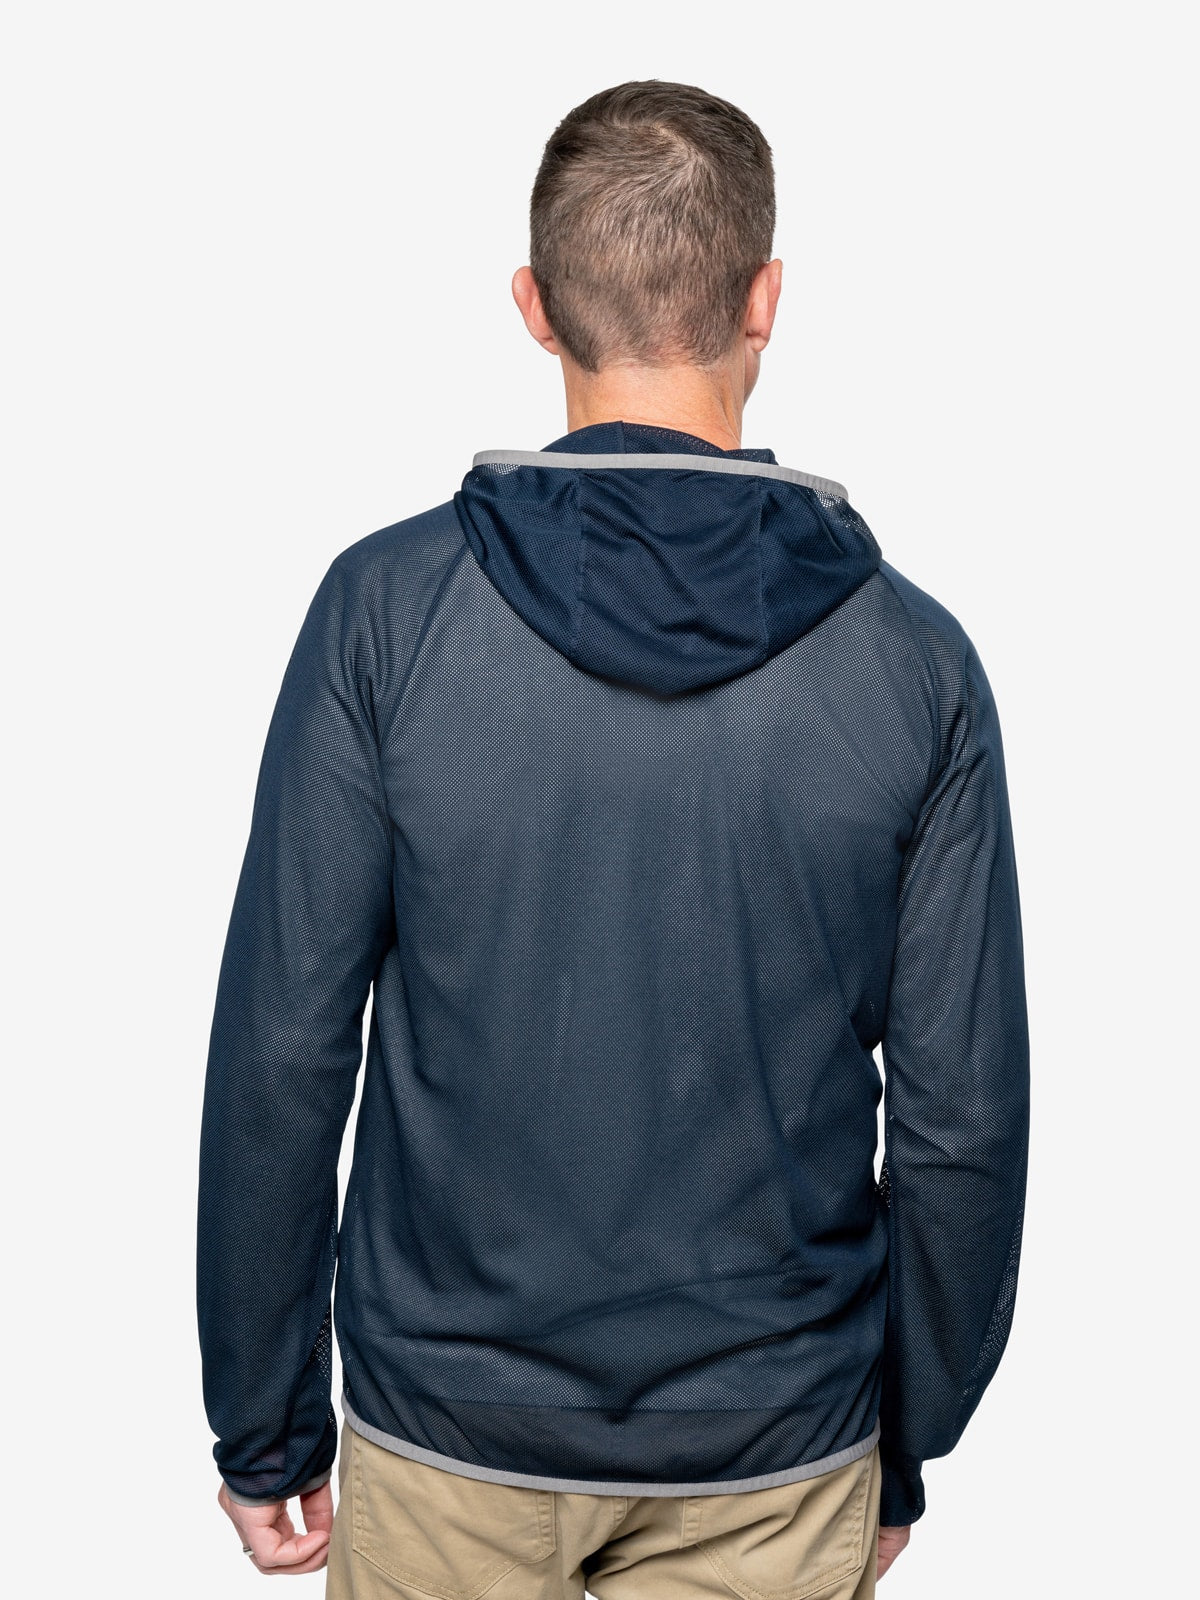 CONNEC Insects Protection Malartic Hoodie for Men. Long Sleeve